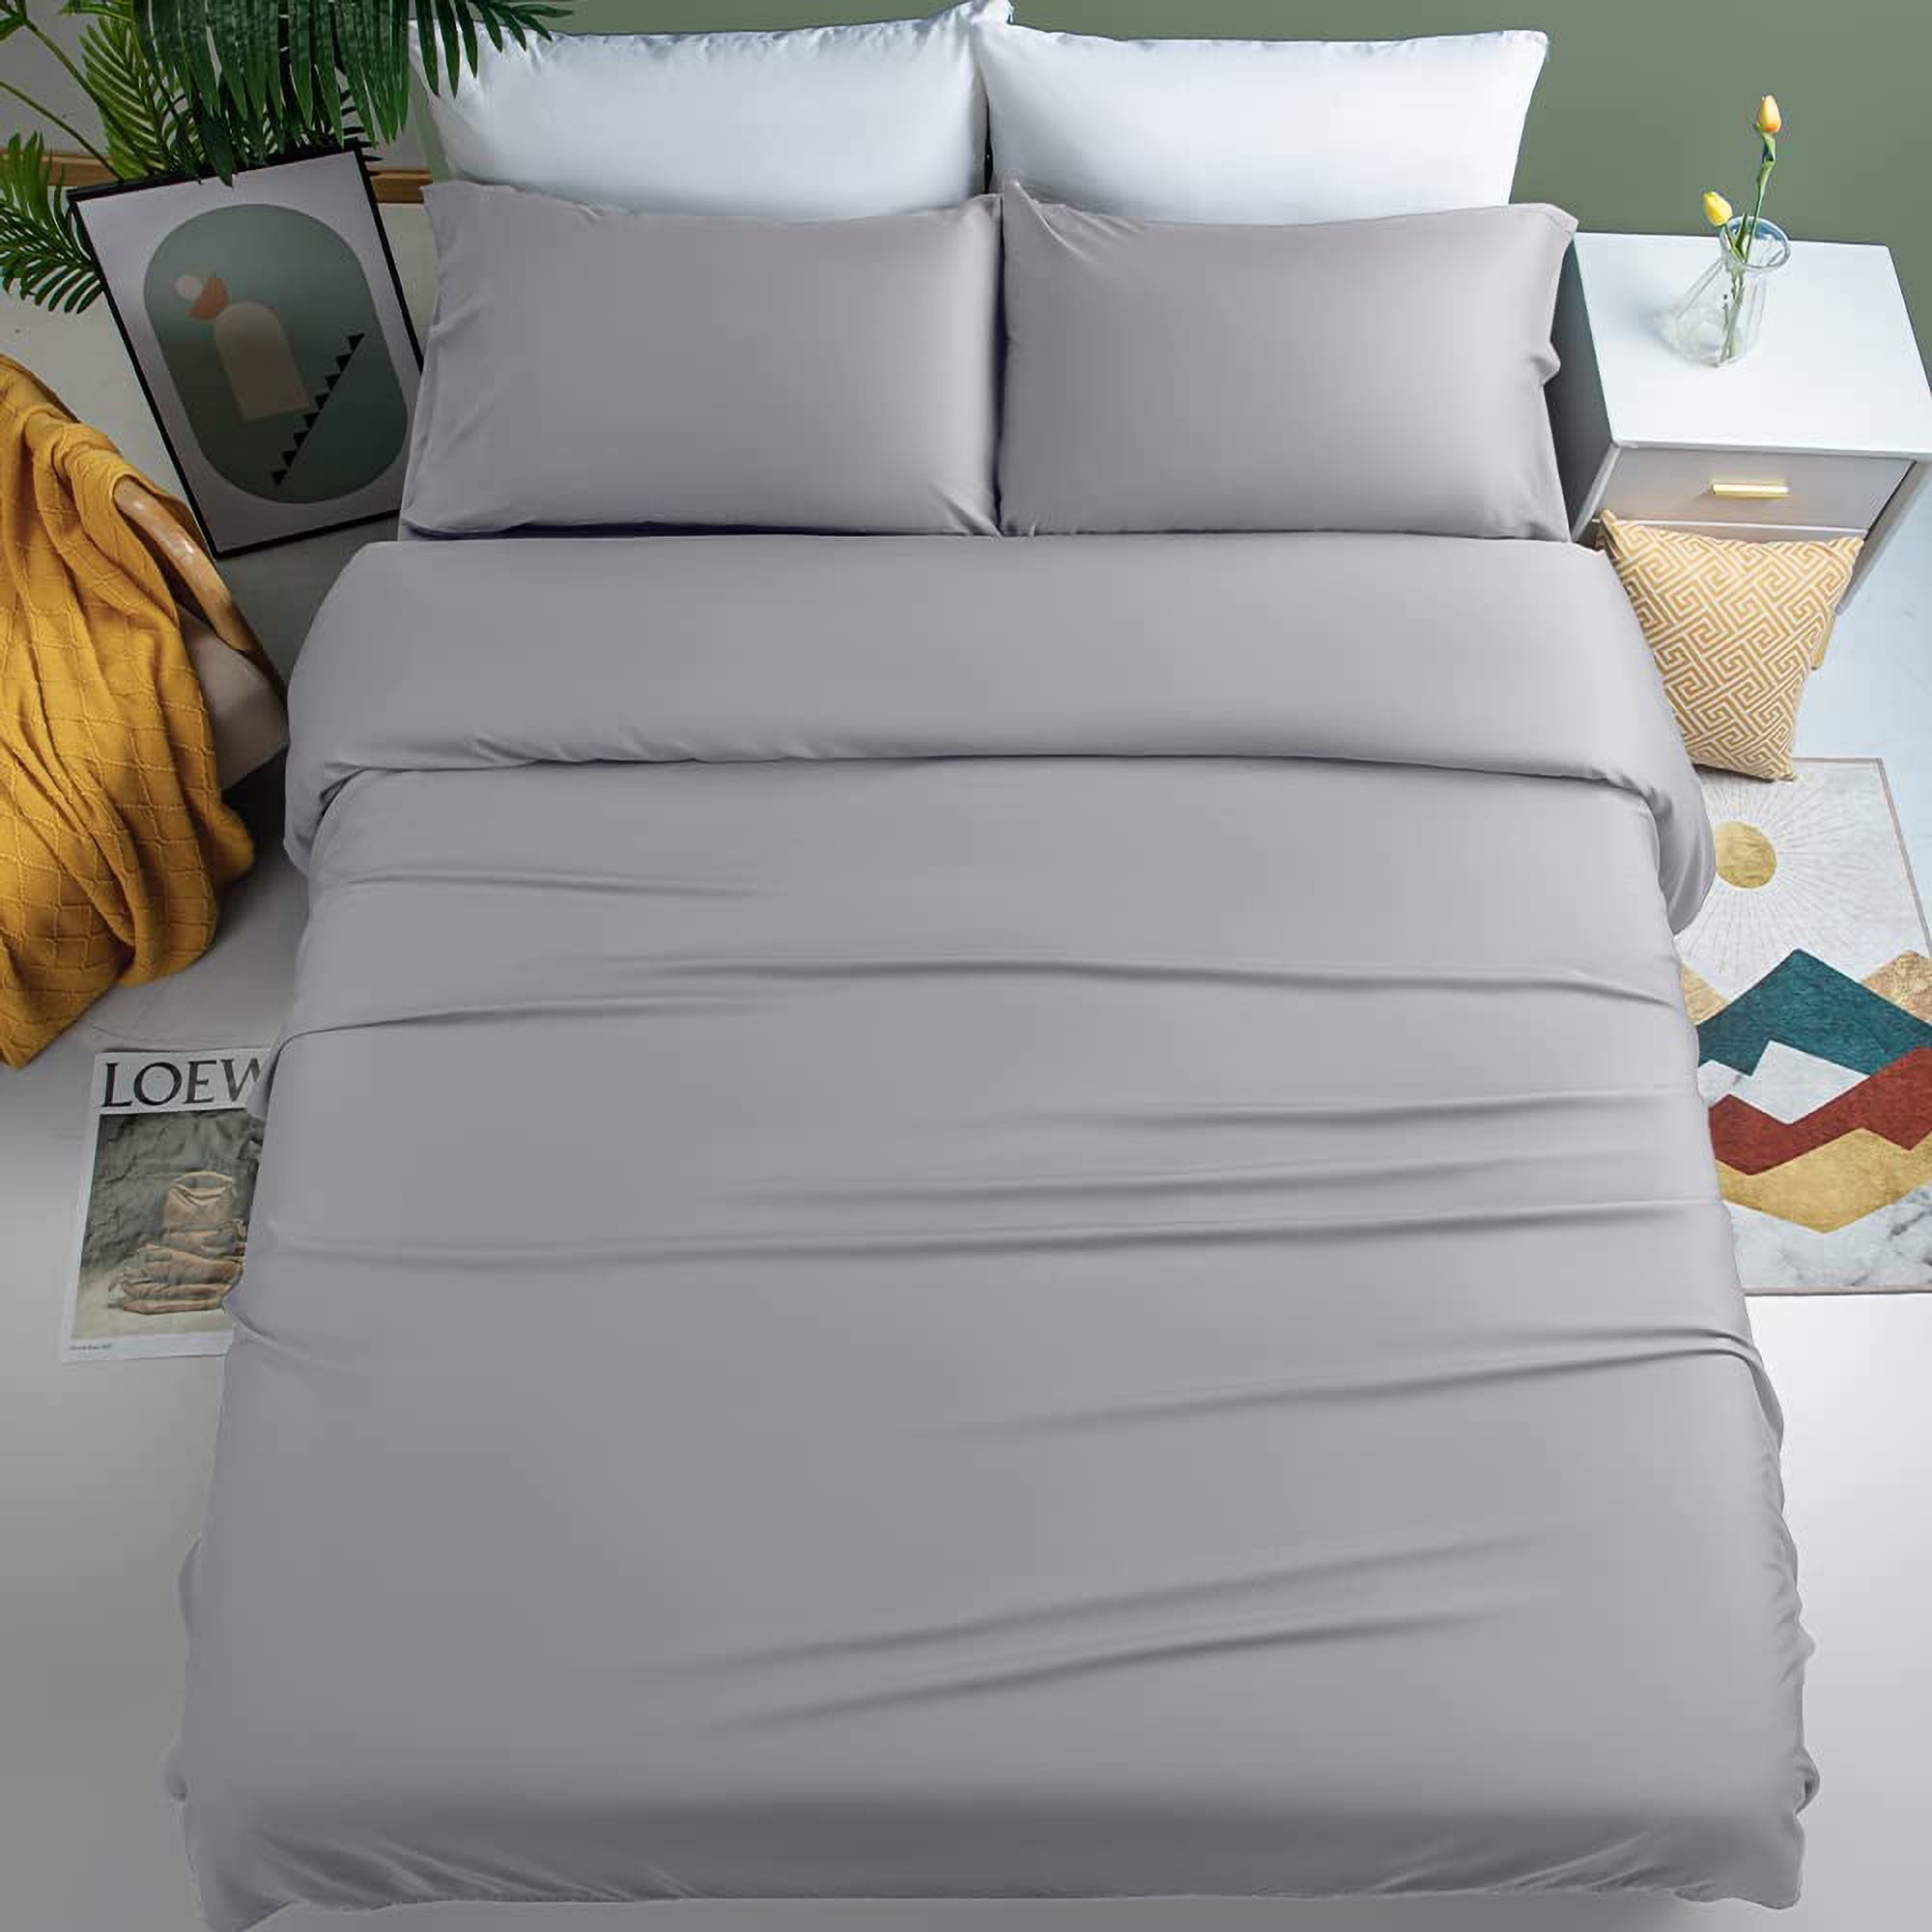 Bedsure Queen Sheet Set - Soft Sheets for Queen Size Bed, 4 Pieces Hotel  Luxury Grey Queen Sheets, E…See more Bedsure Queen Sheet Set - Soft Sheets